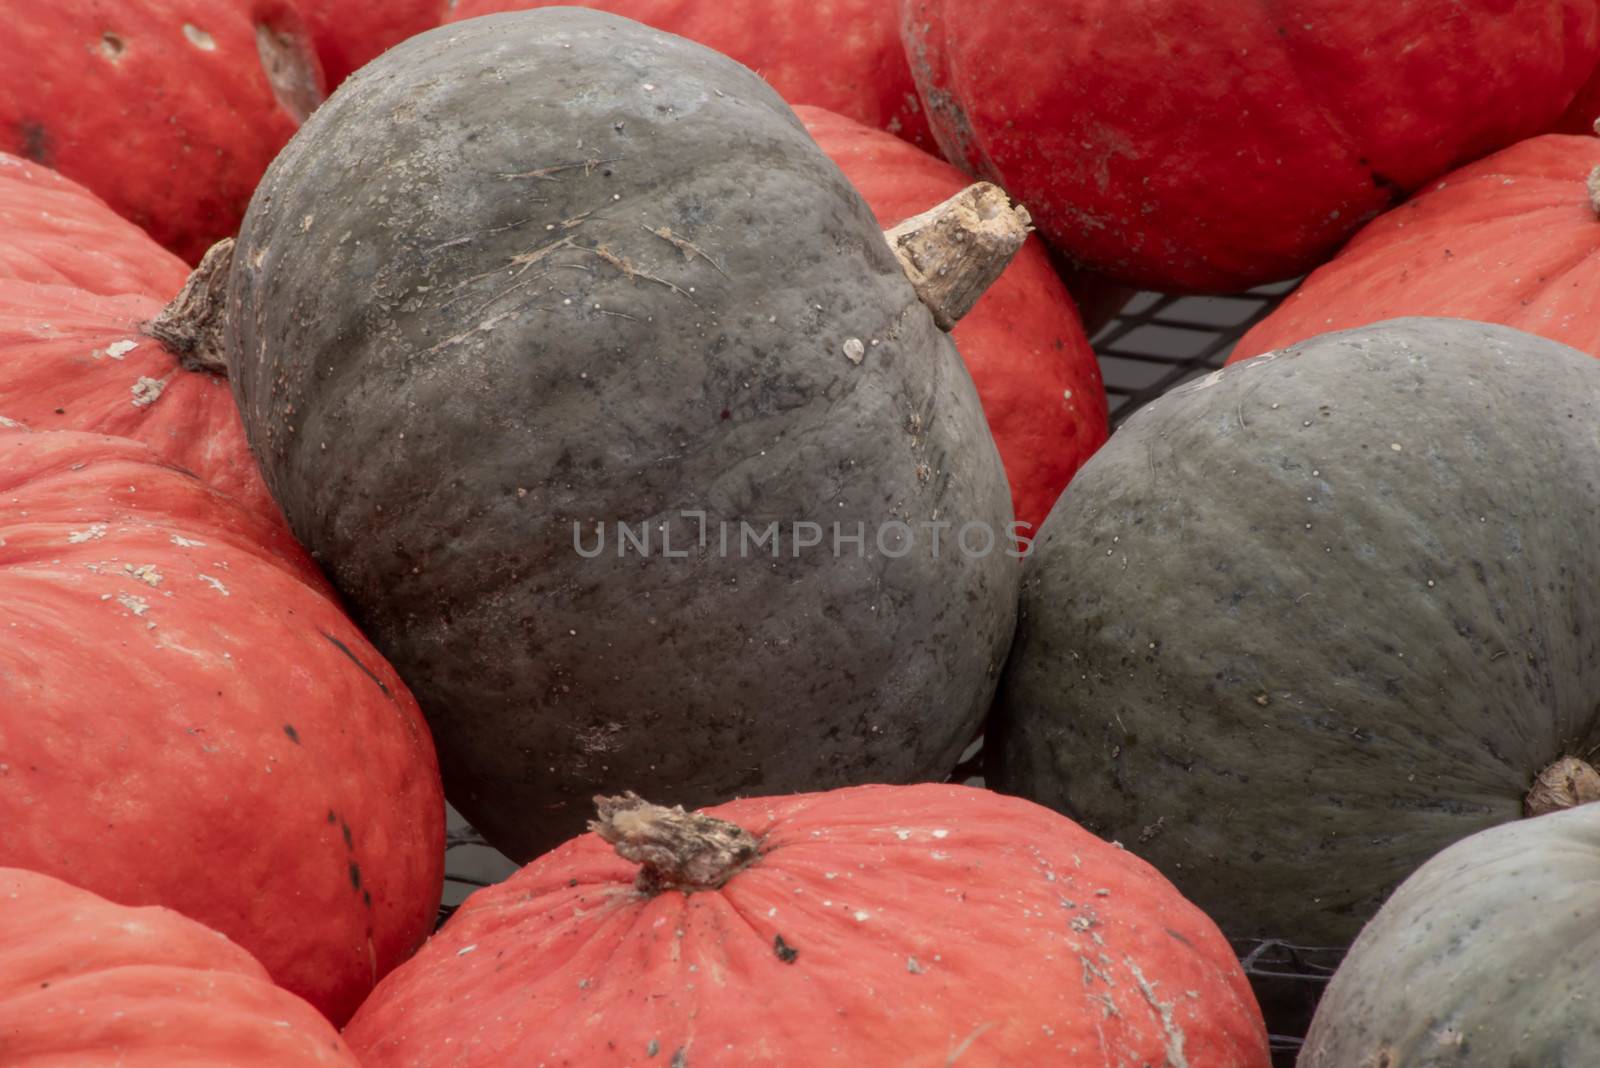 Close up of green and orange pumpkins ready for market by marysalen